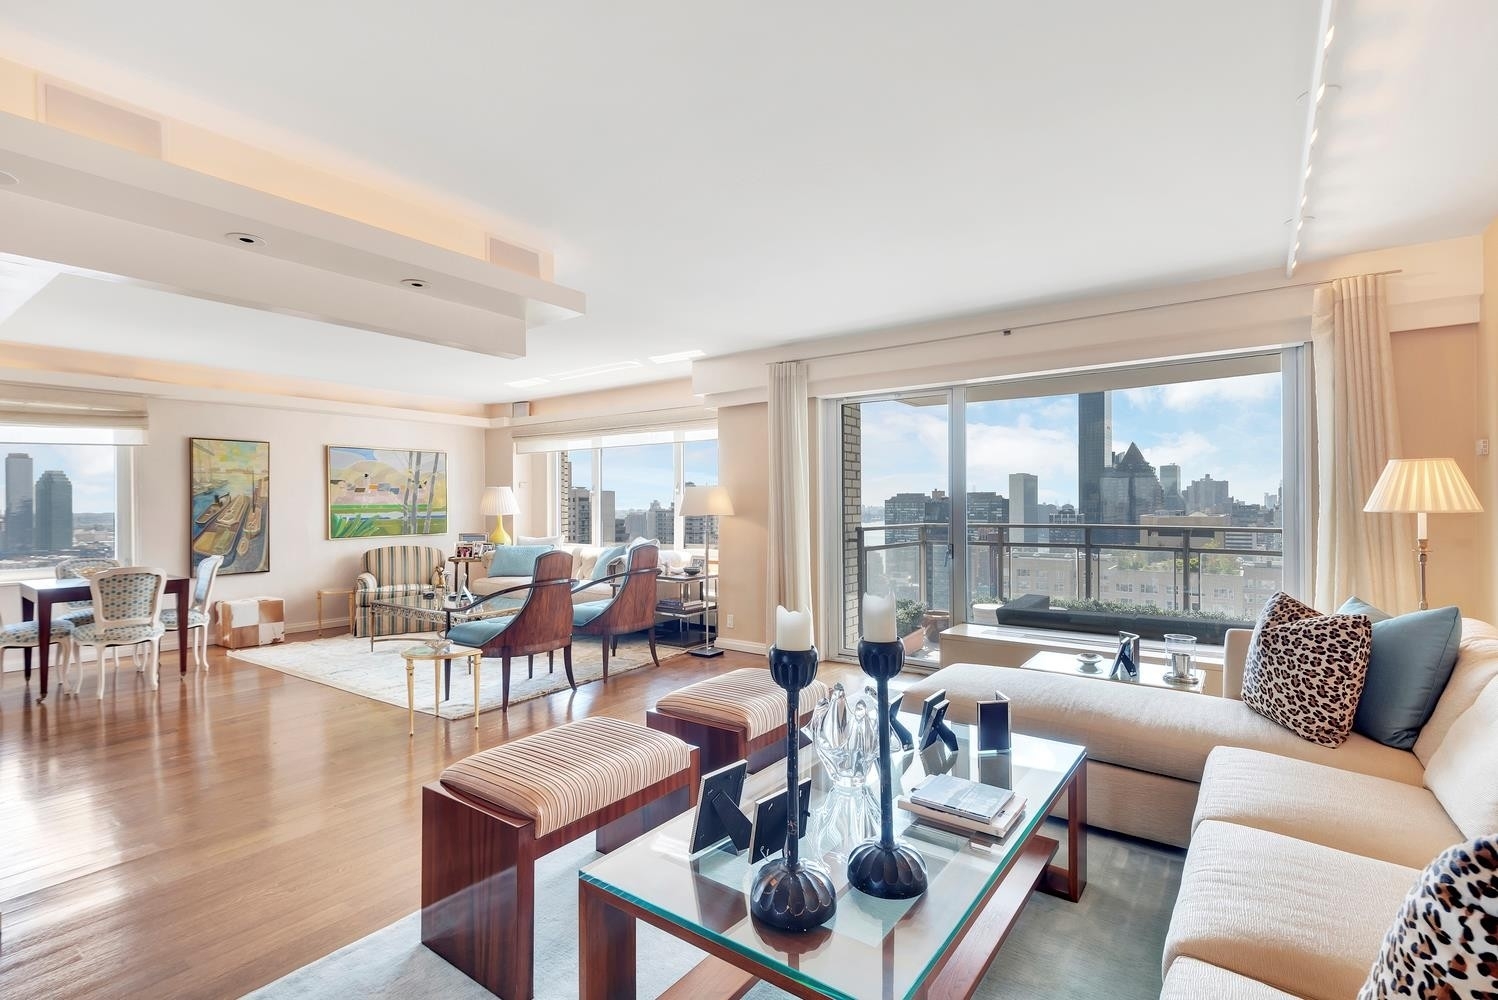 Co-op Properties for Sale at The Excelsior, 303 E 57TH ST, 35G Midtown East, New York, New York 10022